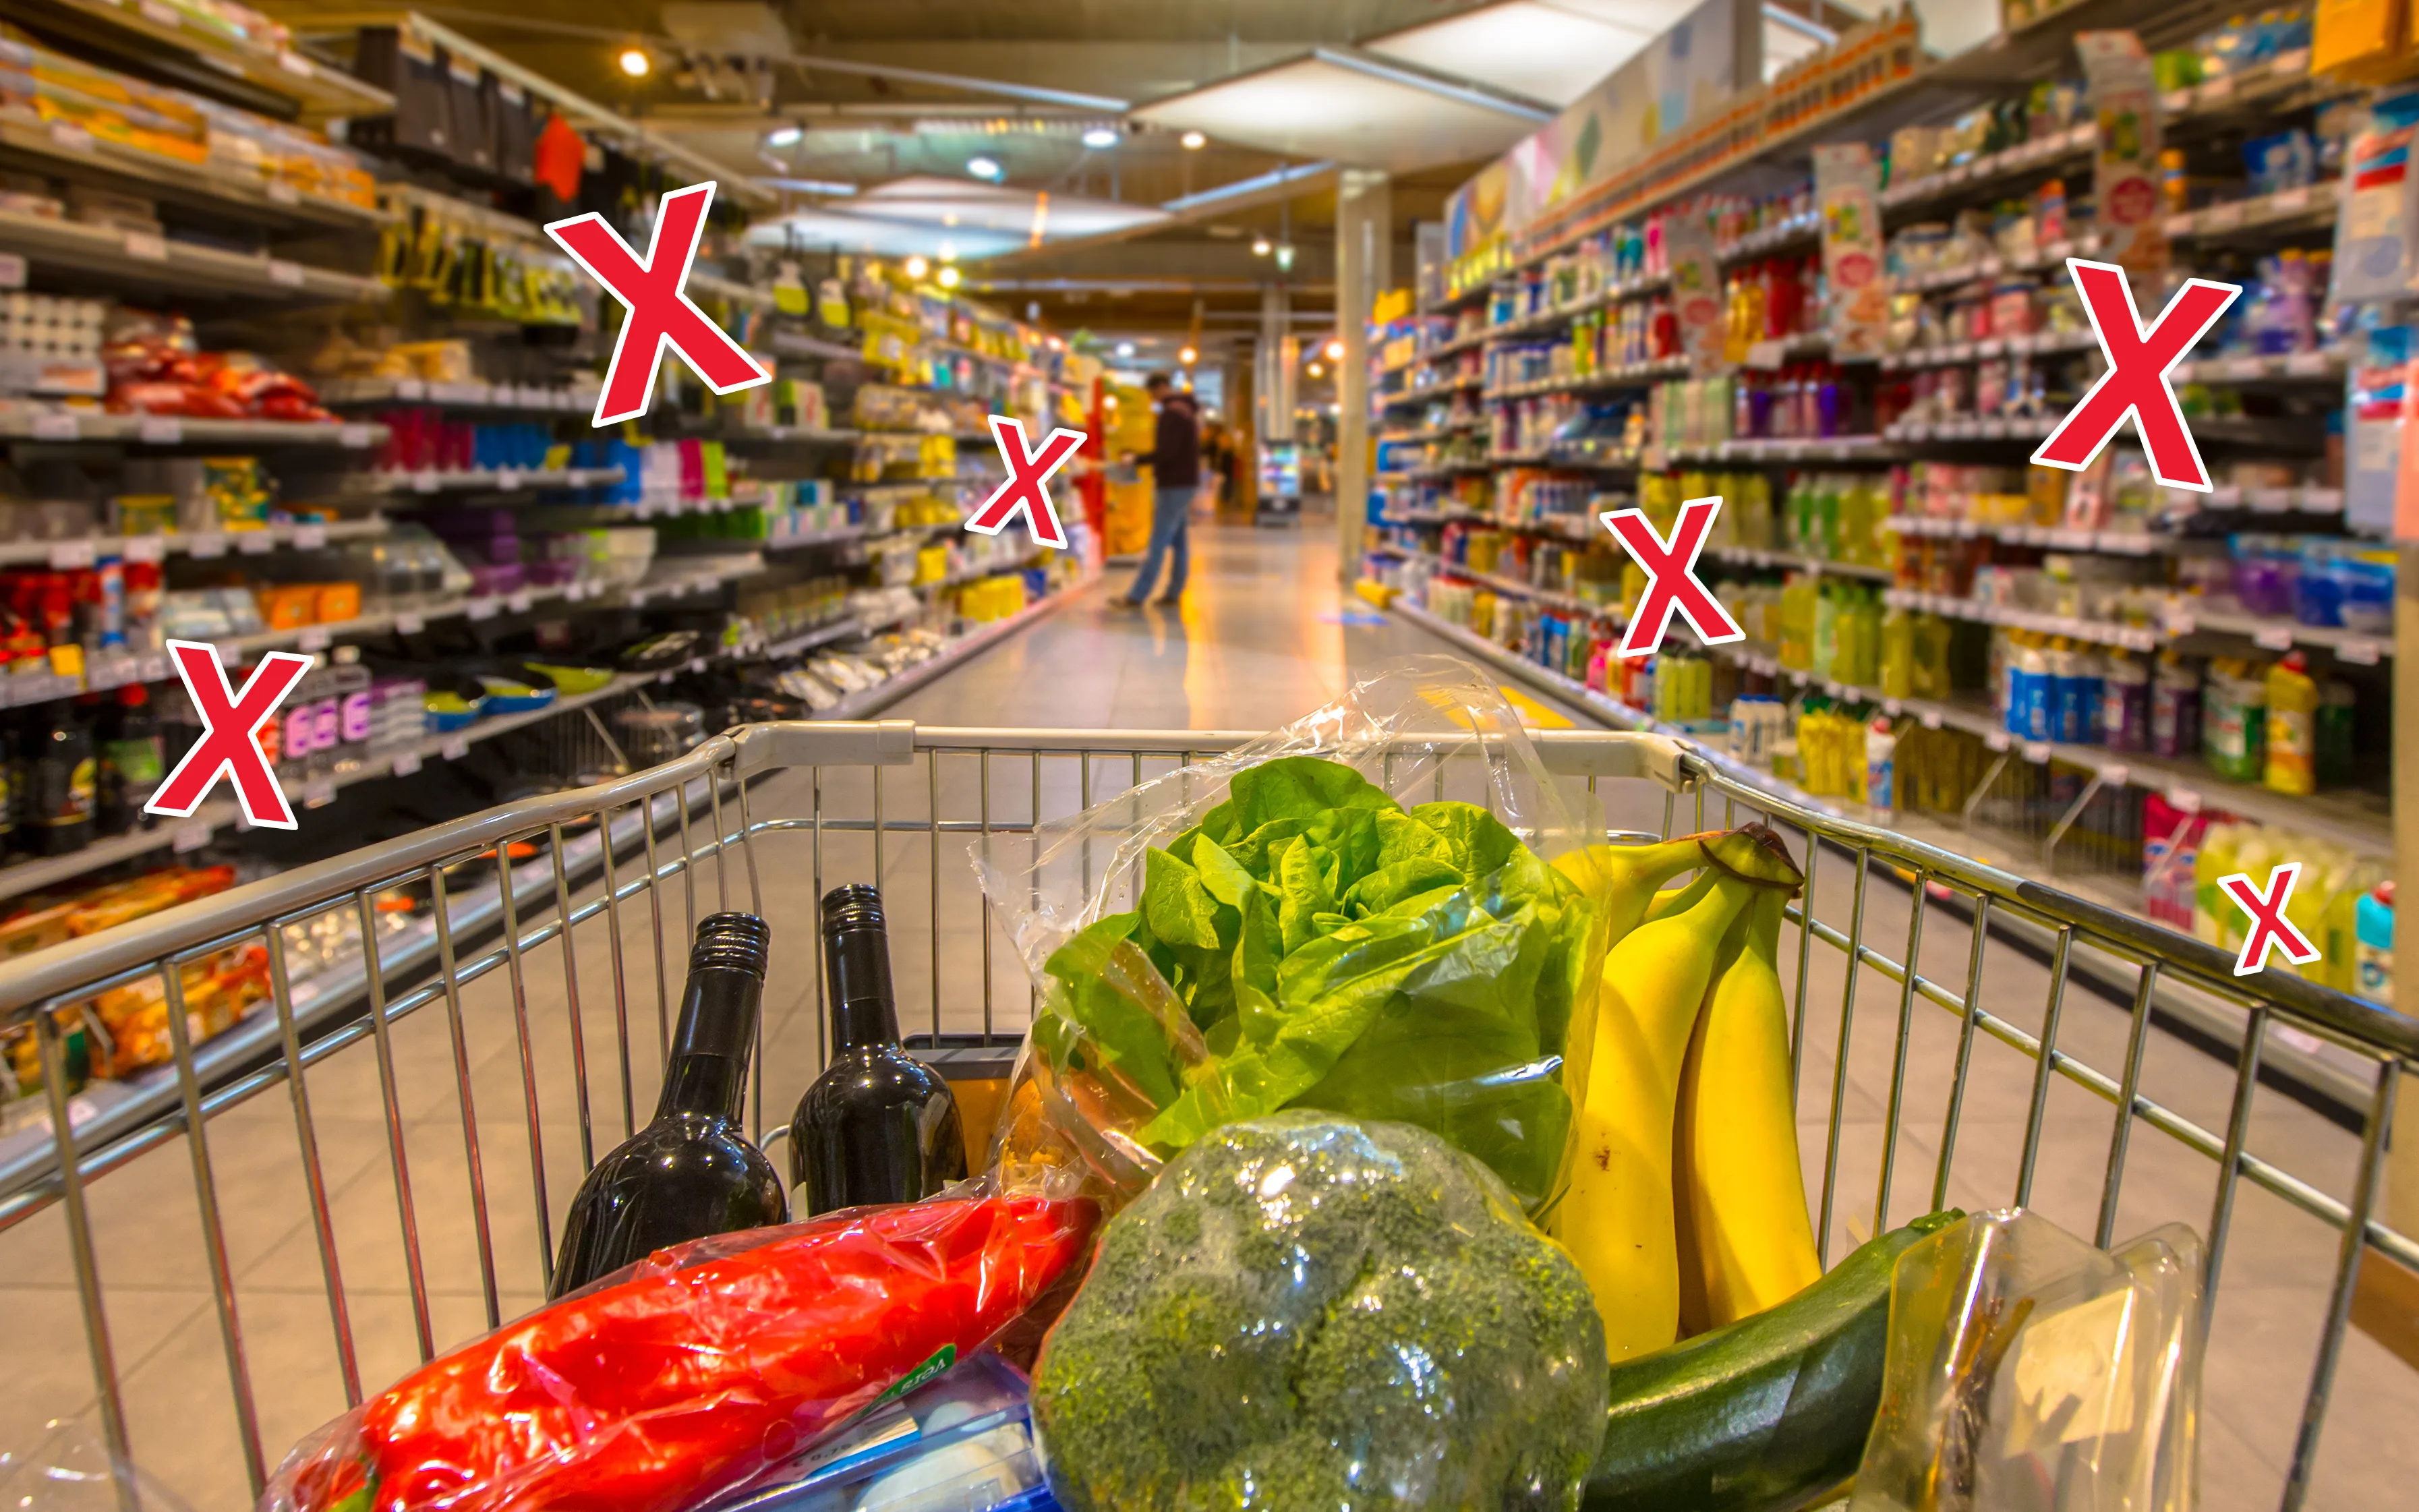 6 Things You Should NEVER Buy at a Grocery Store